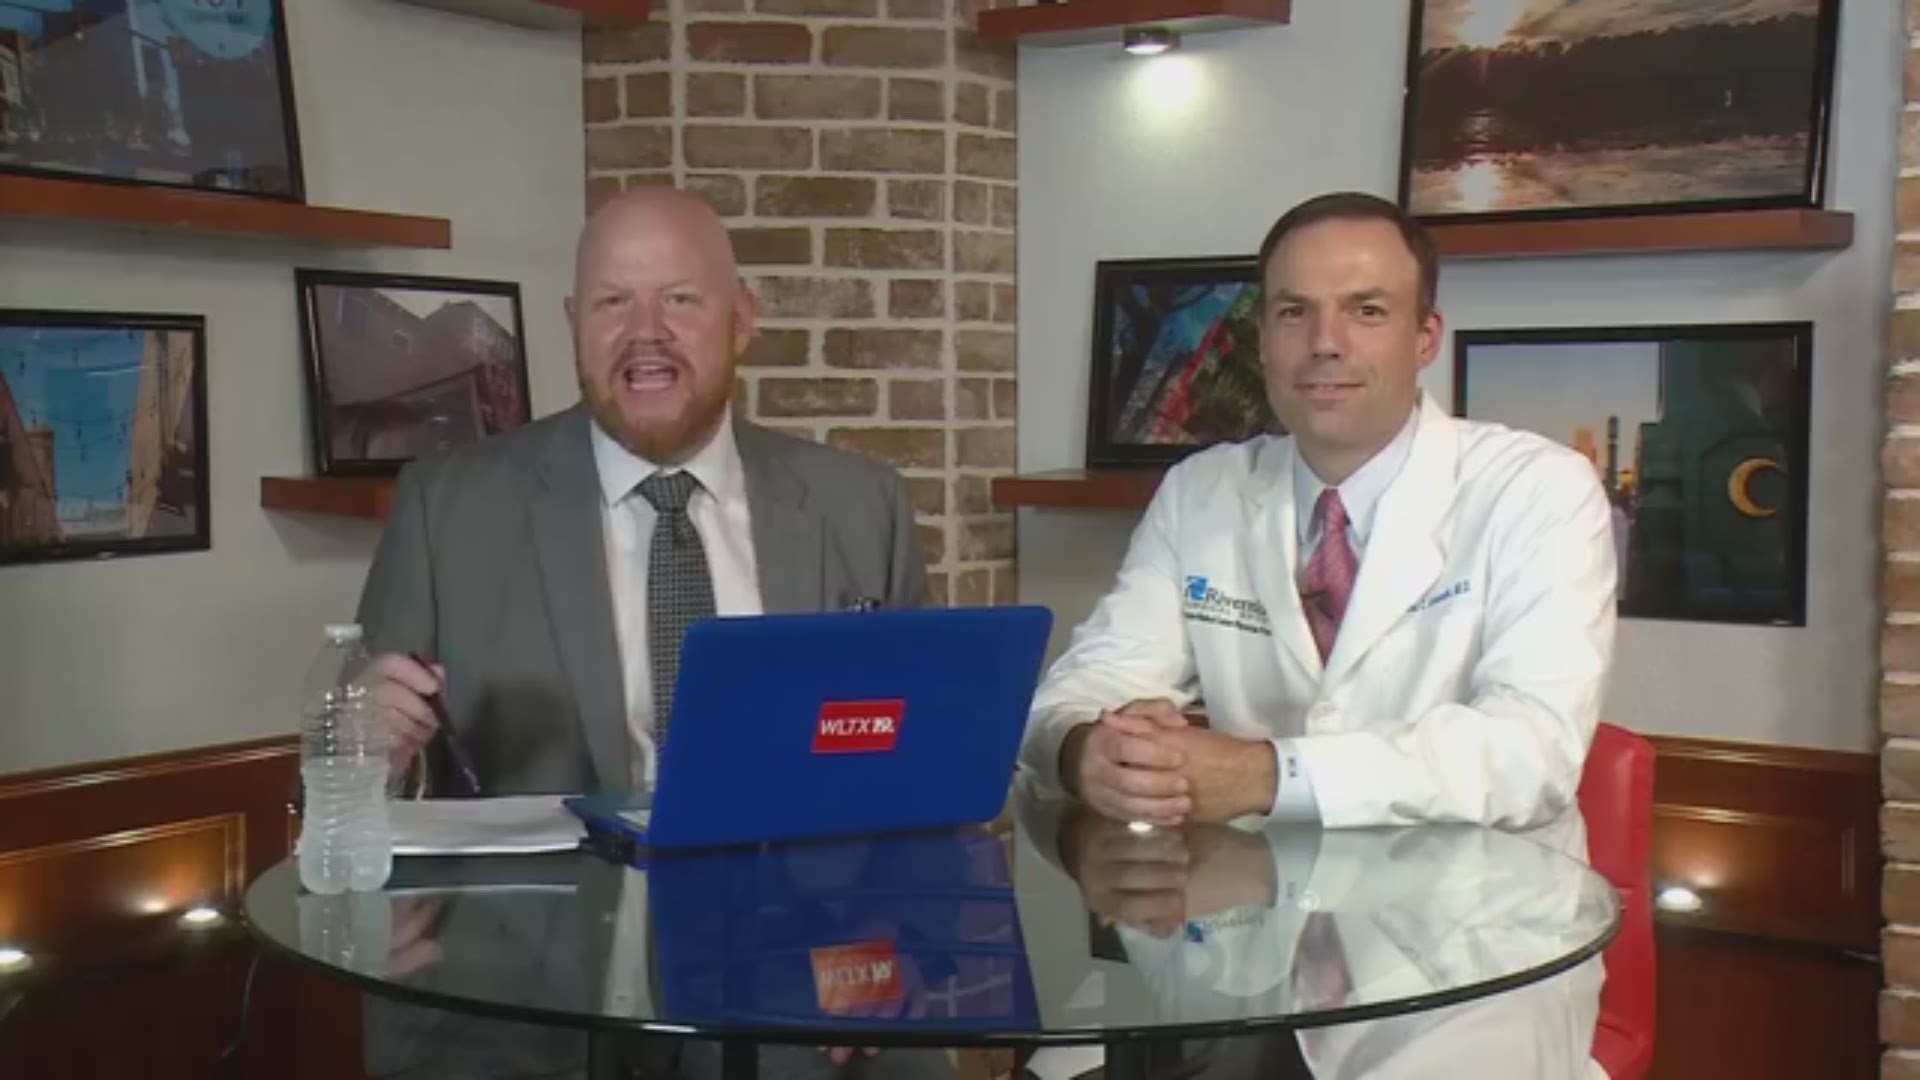 Doctors from the South Carolina Obesity Center answered weight-loss questions during a live Q and A.